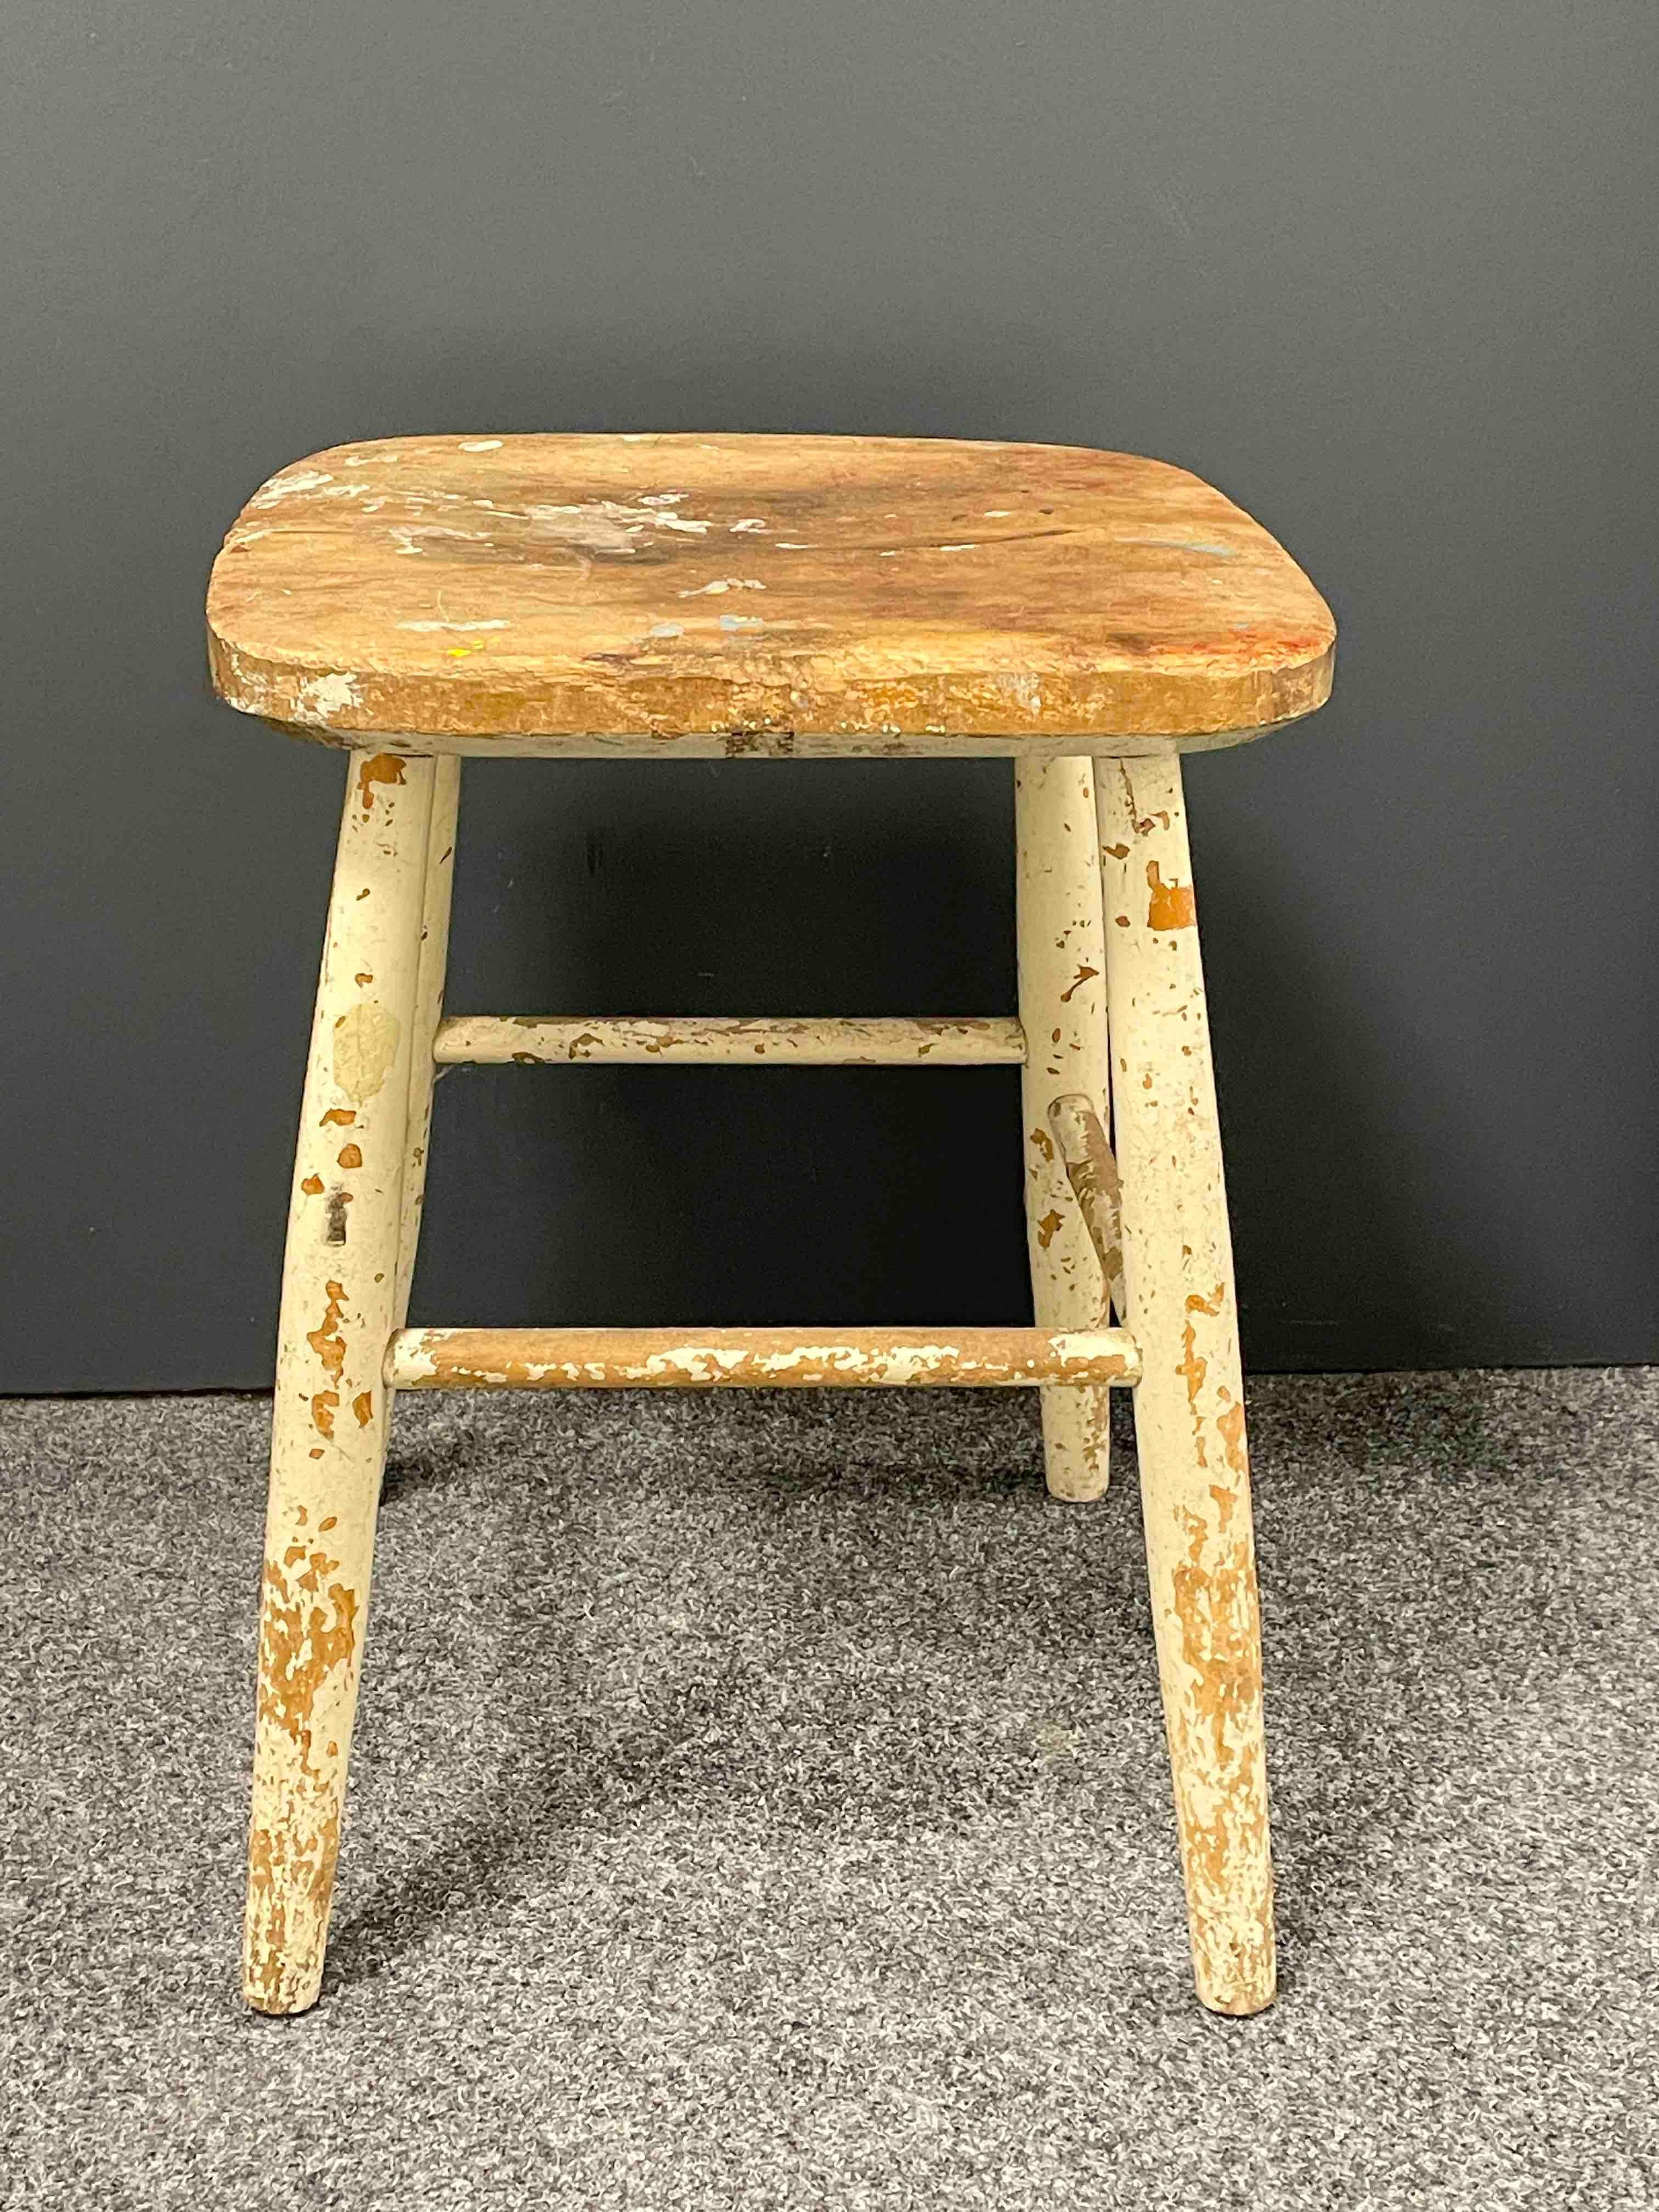 Classic 1910s or older, wood stool. Made of wood, hand painted, hand carved. Found at an estate sale in Stockholm, Sweden. Some paint lost and in shabby chic design, but this is old-age. Has parts of the old manufactory label but can not read it.